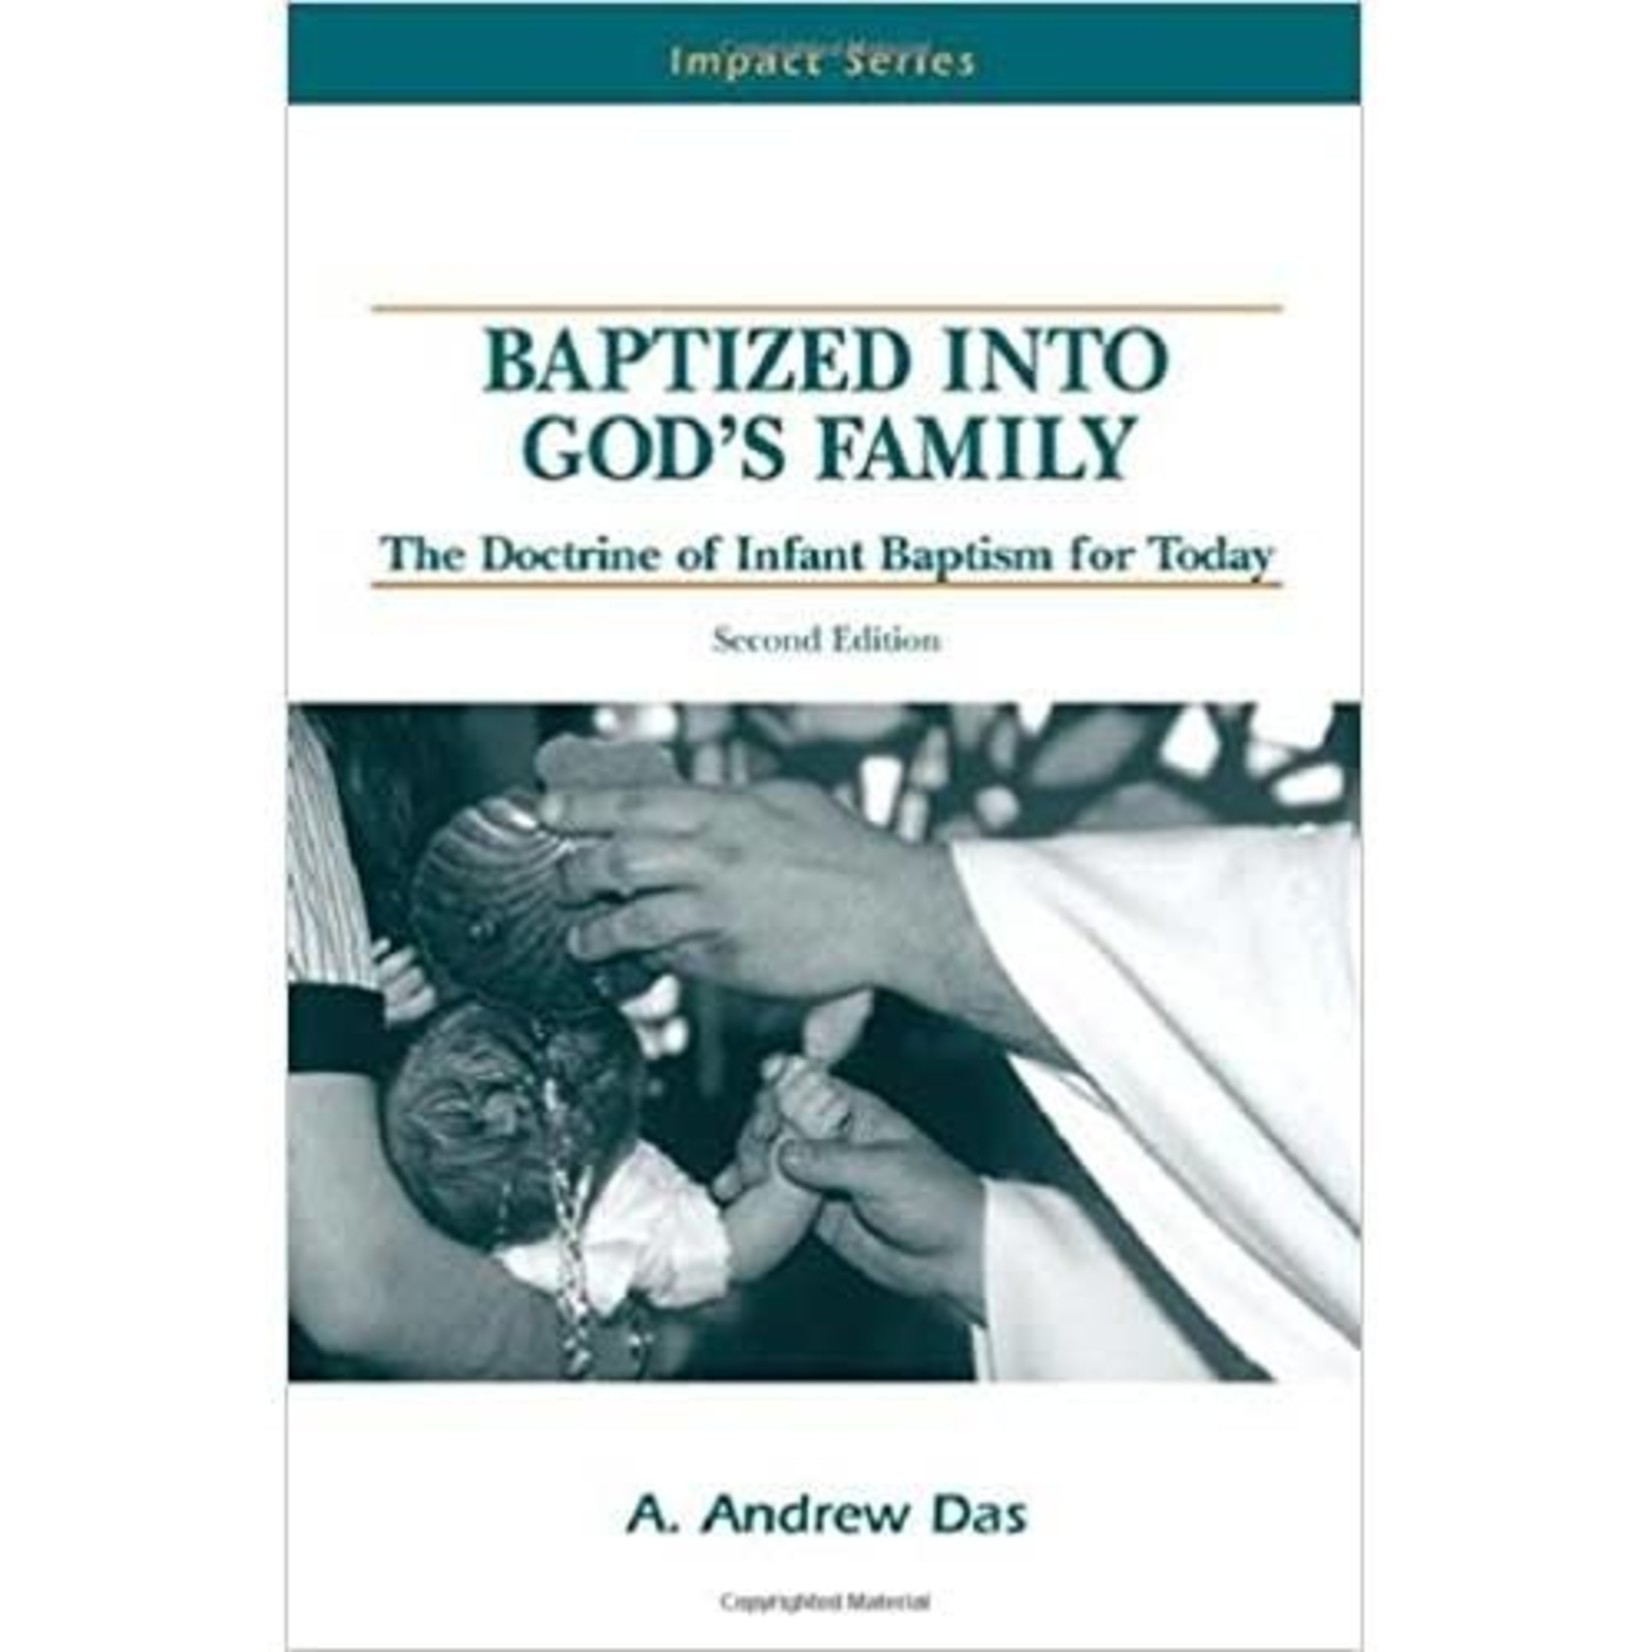 Baptized Into God's Family - The Doctrine of Infant Baptism for Today